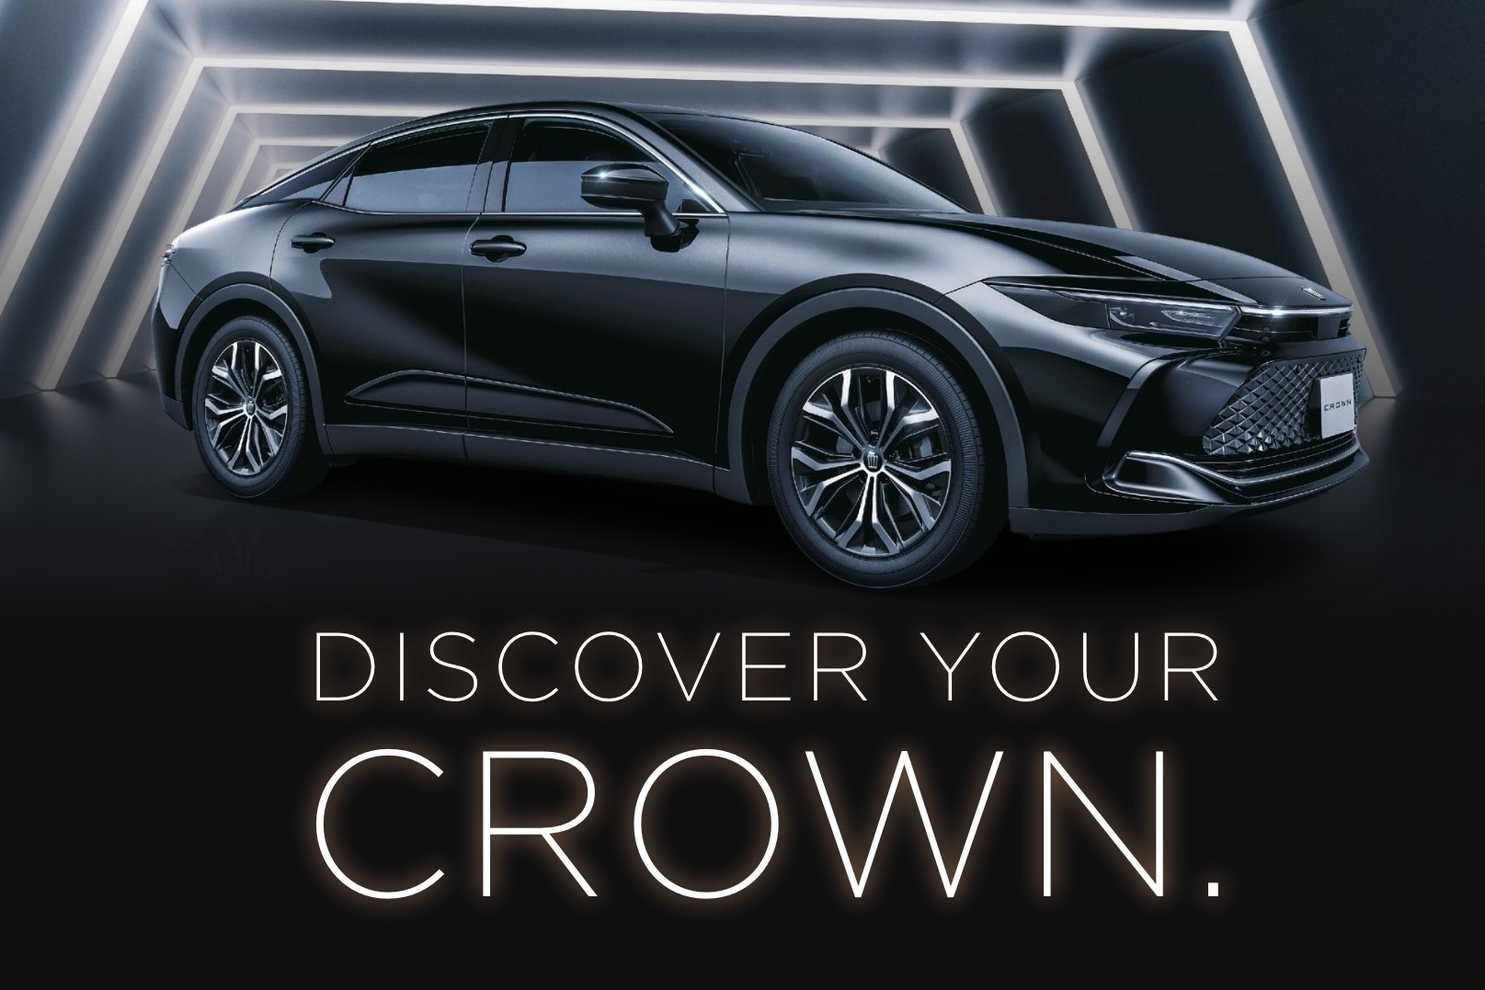 DISCOVER YOUR CROWN